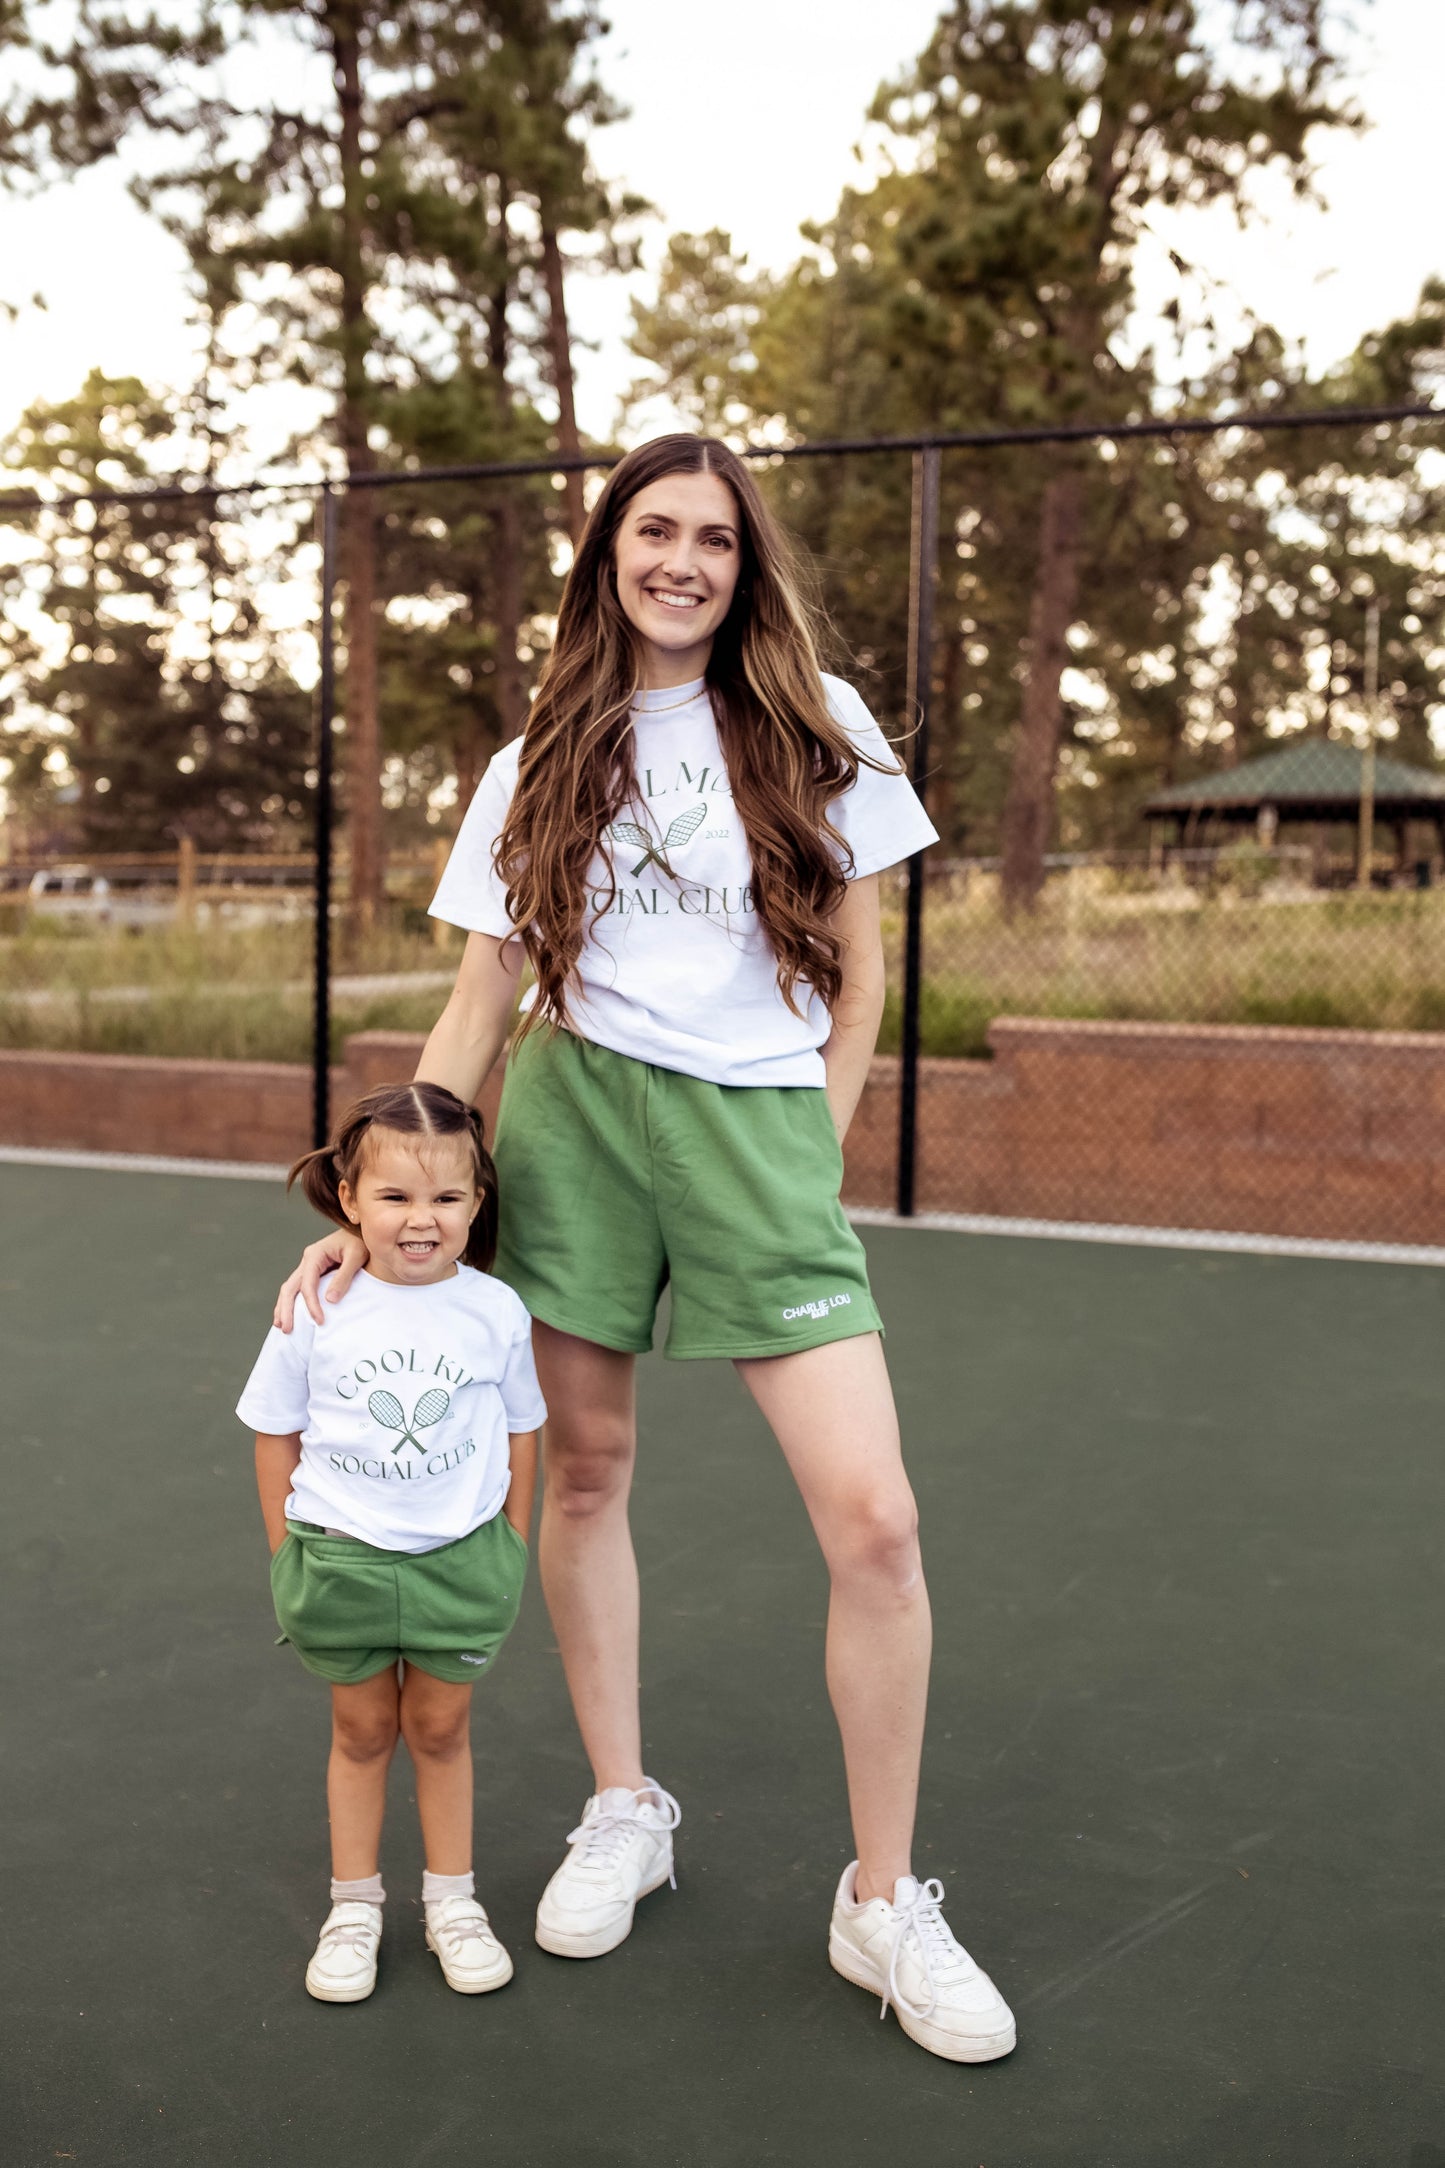 White women's t-shirt with green graphic that says Cool Mom Social Club in crew neck style.